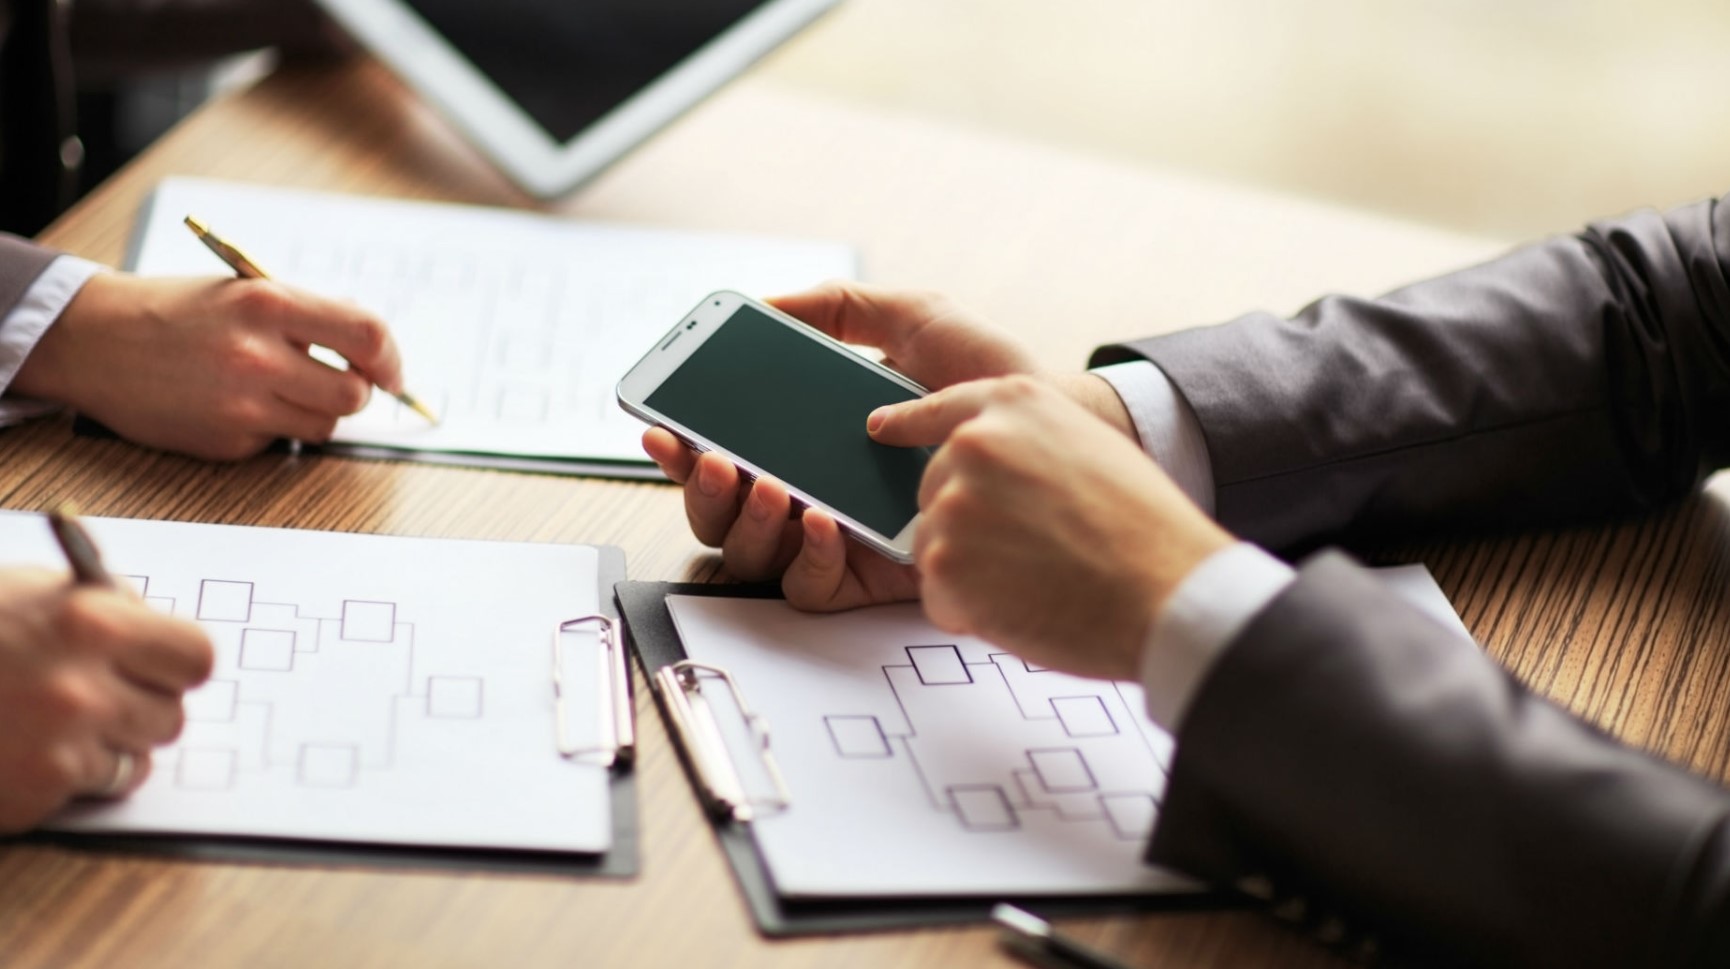 How to know when it’s time to update your business mobile strategy?